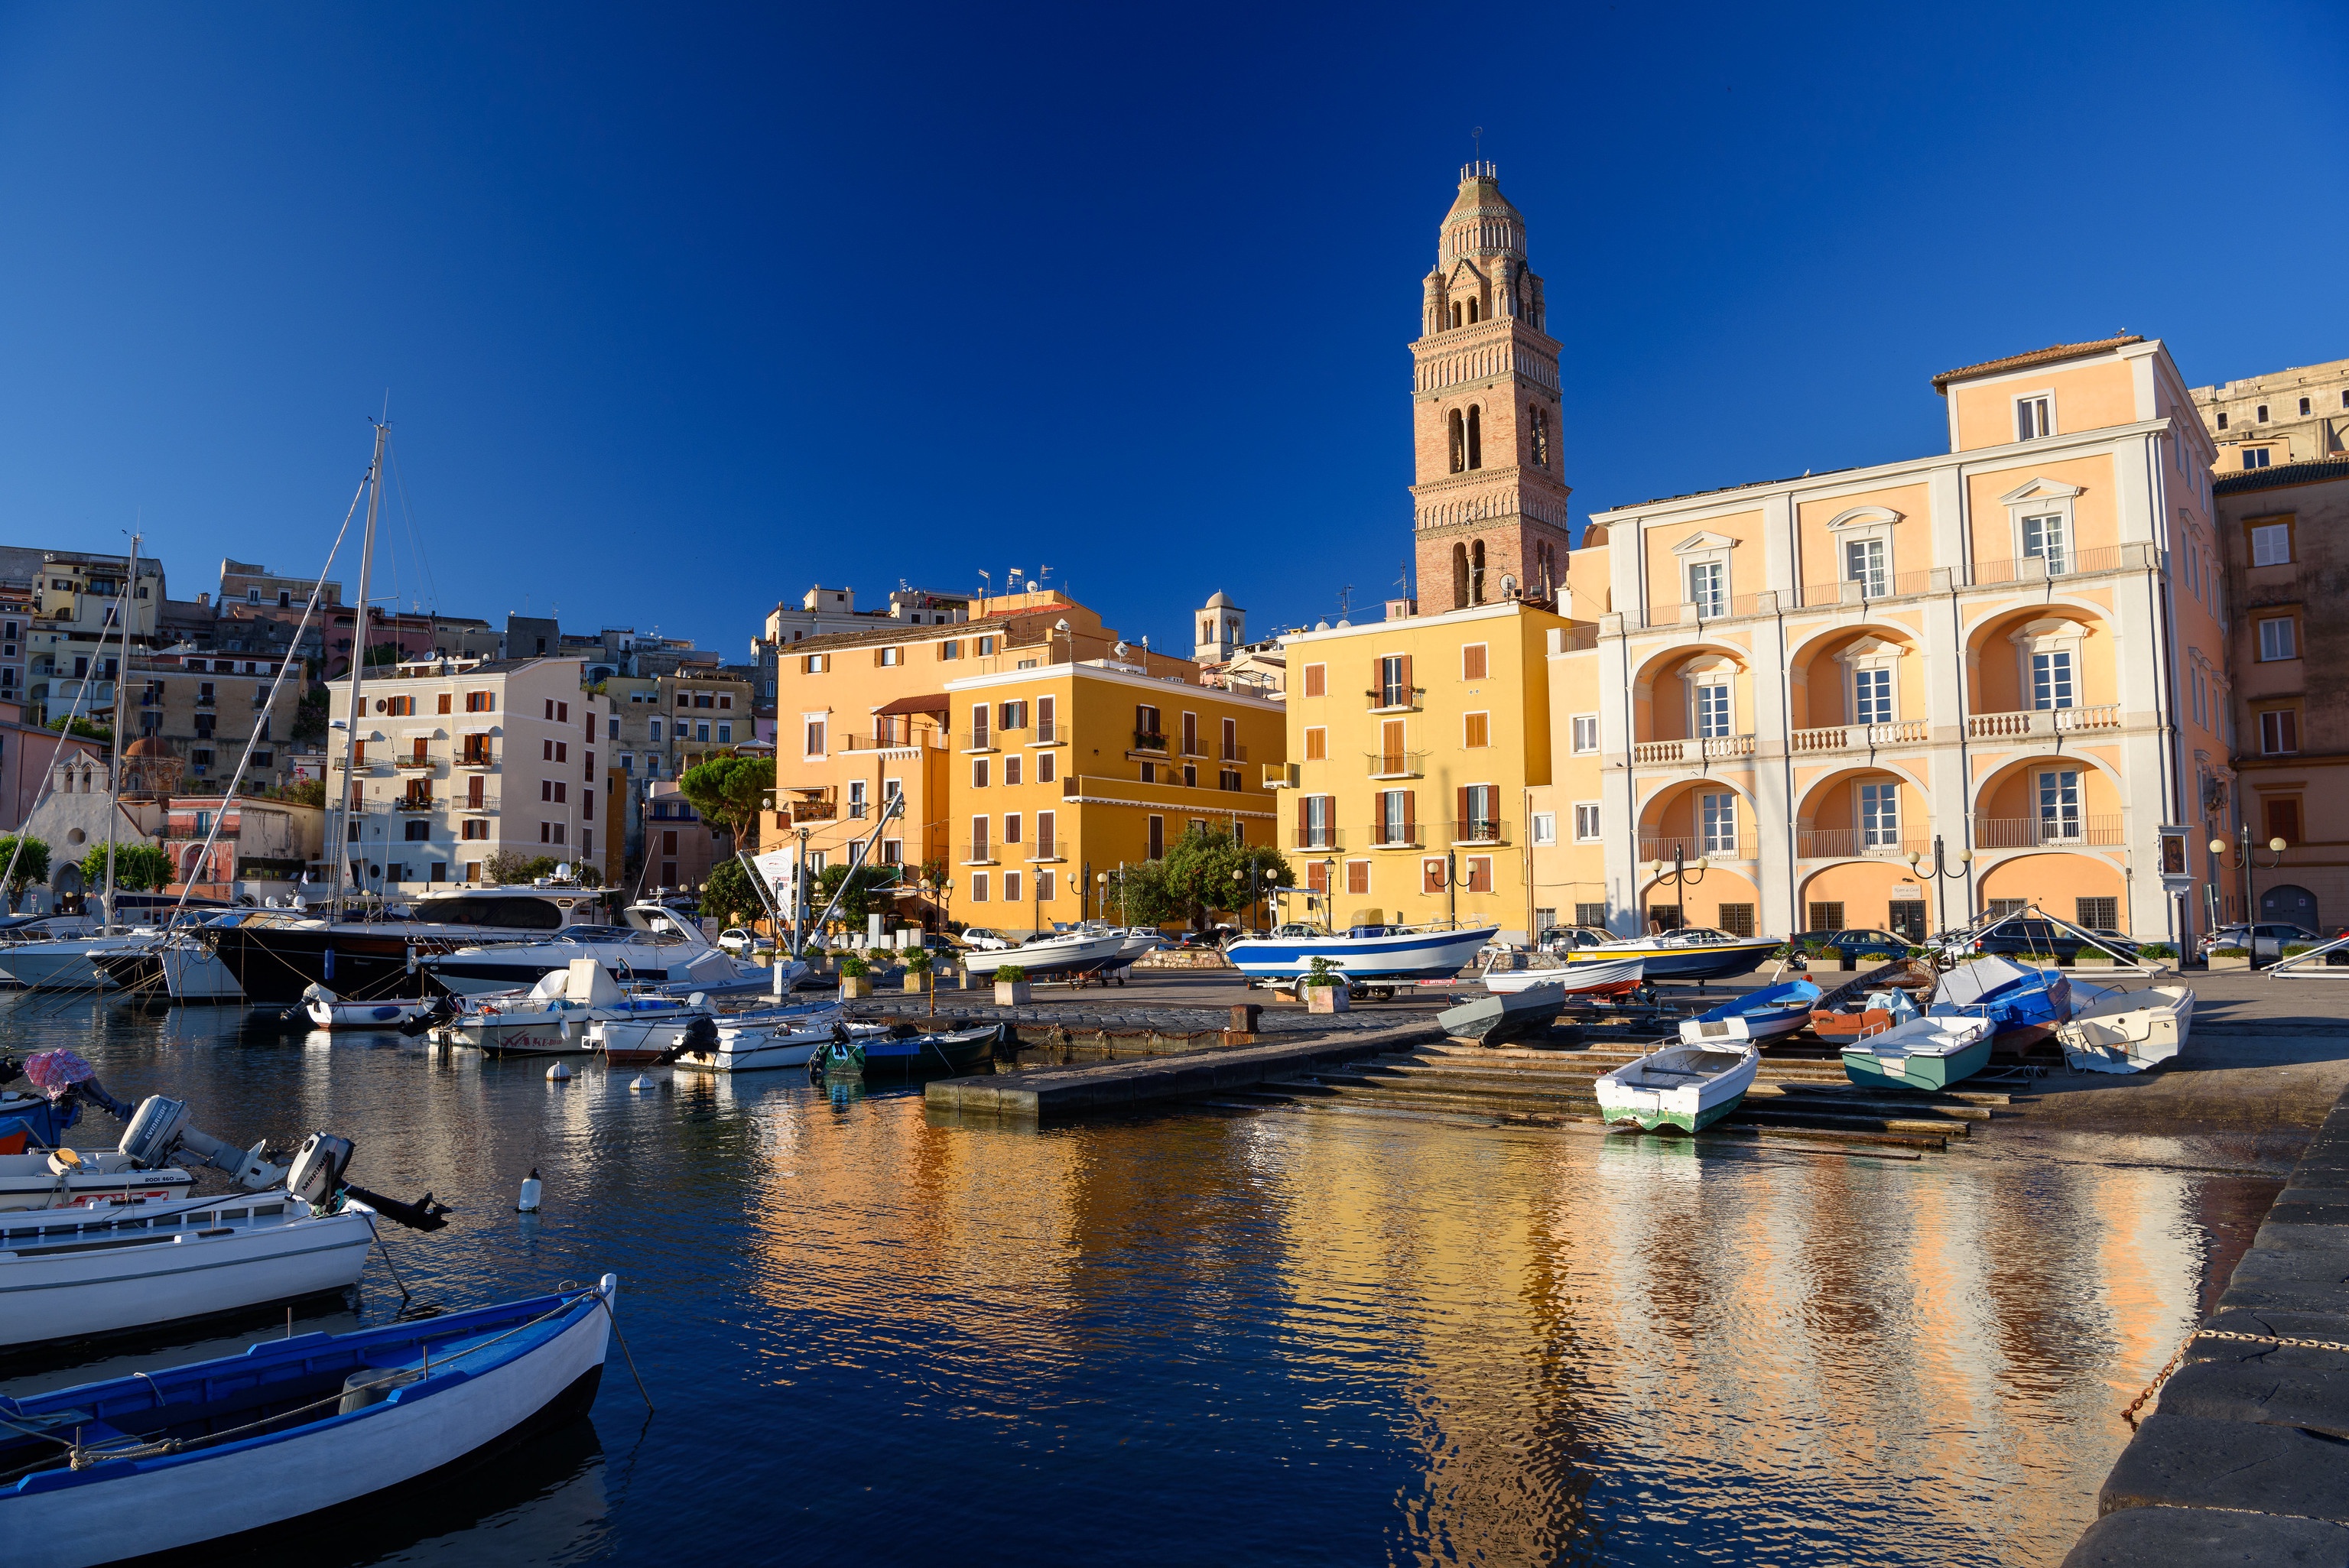 man made, town, bell tower, gaeta, harbor, house, italy, towns